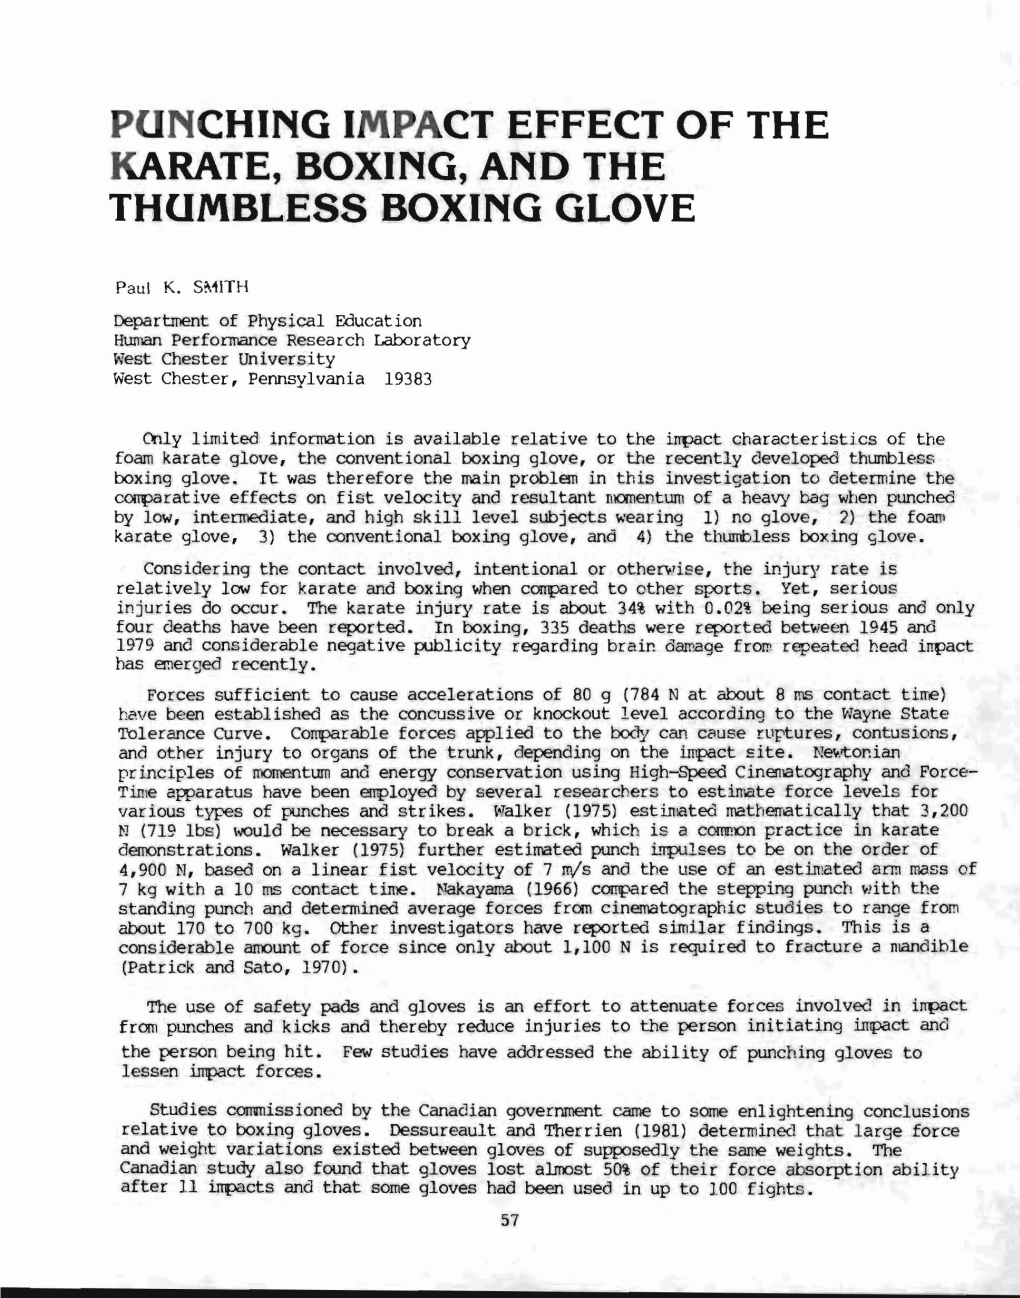 Punching Impact Effect of the Karate, Boxing, and the Thumbless Boxing Glove